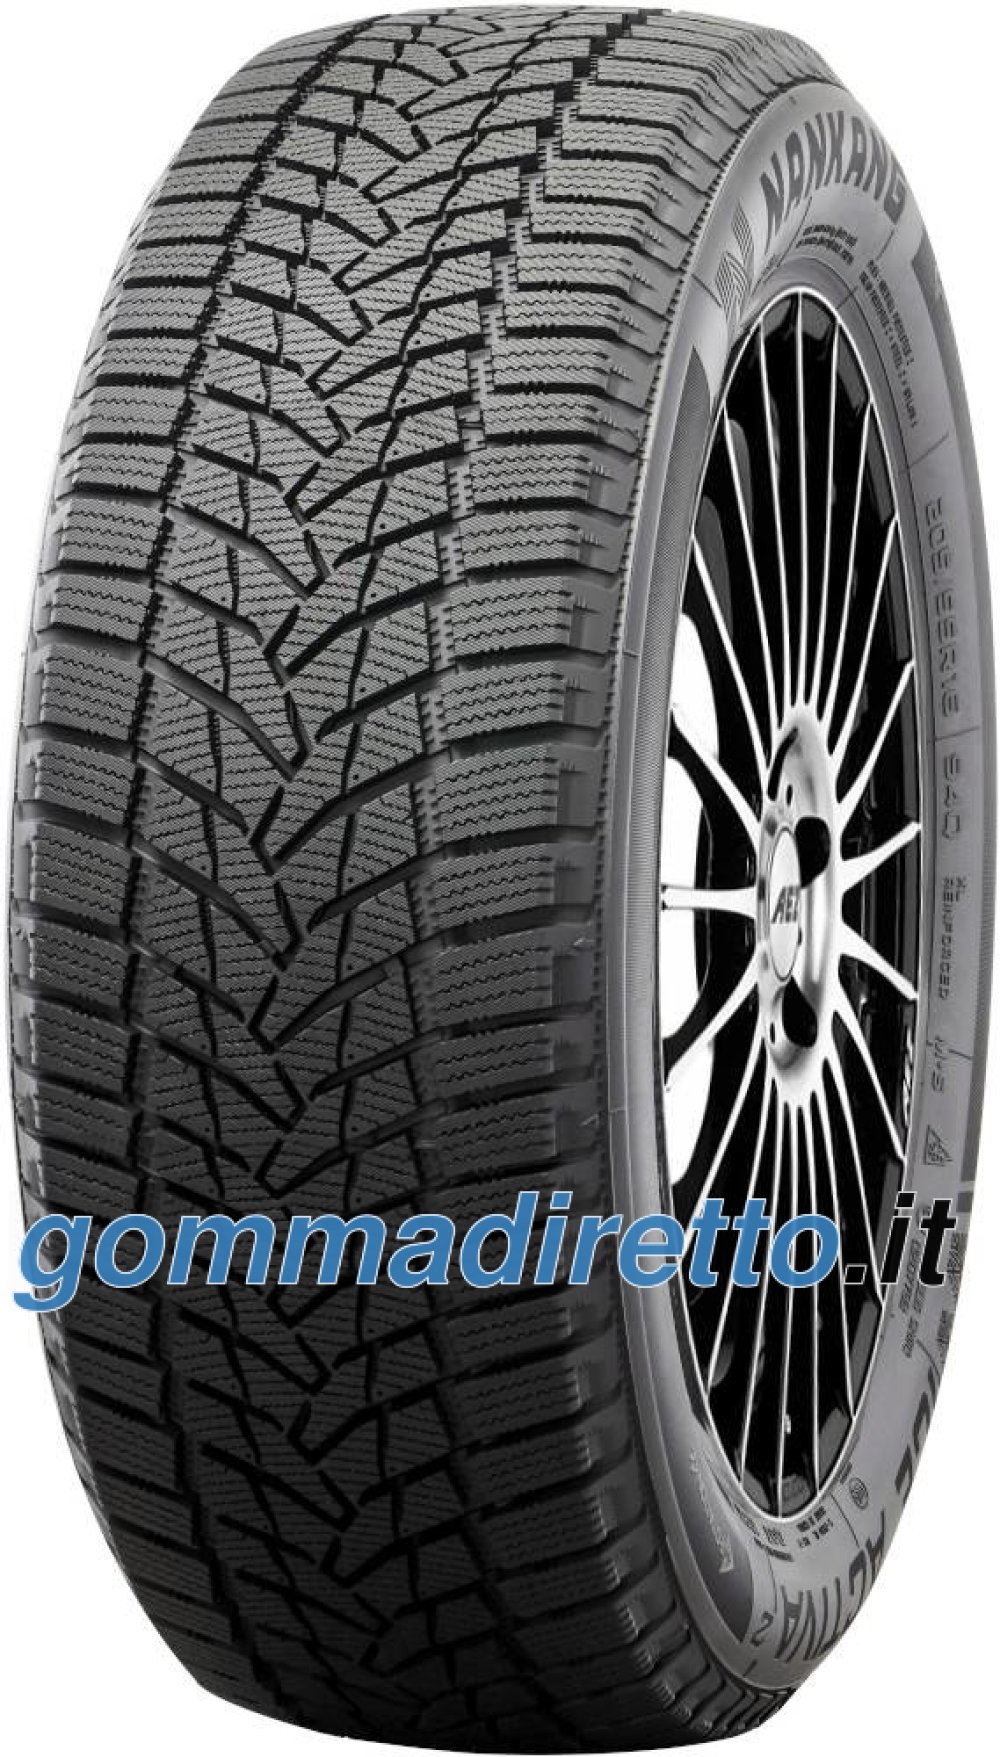 Image of Nankang ICE ACTIVA 2 ( 225/50 R18 99T XL, Nordic compound )